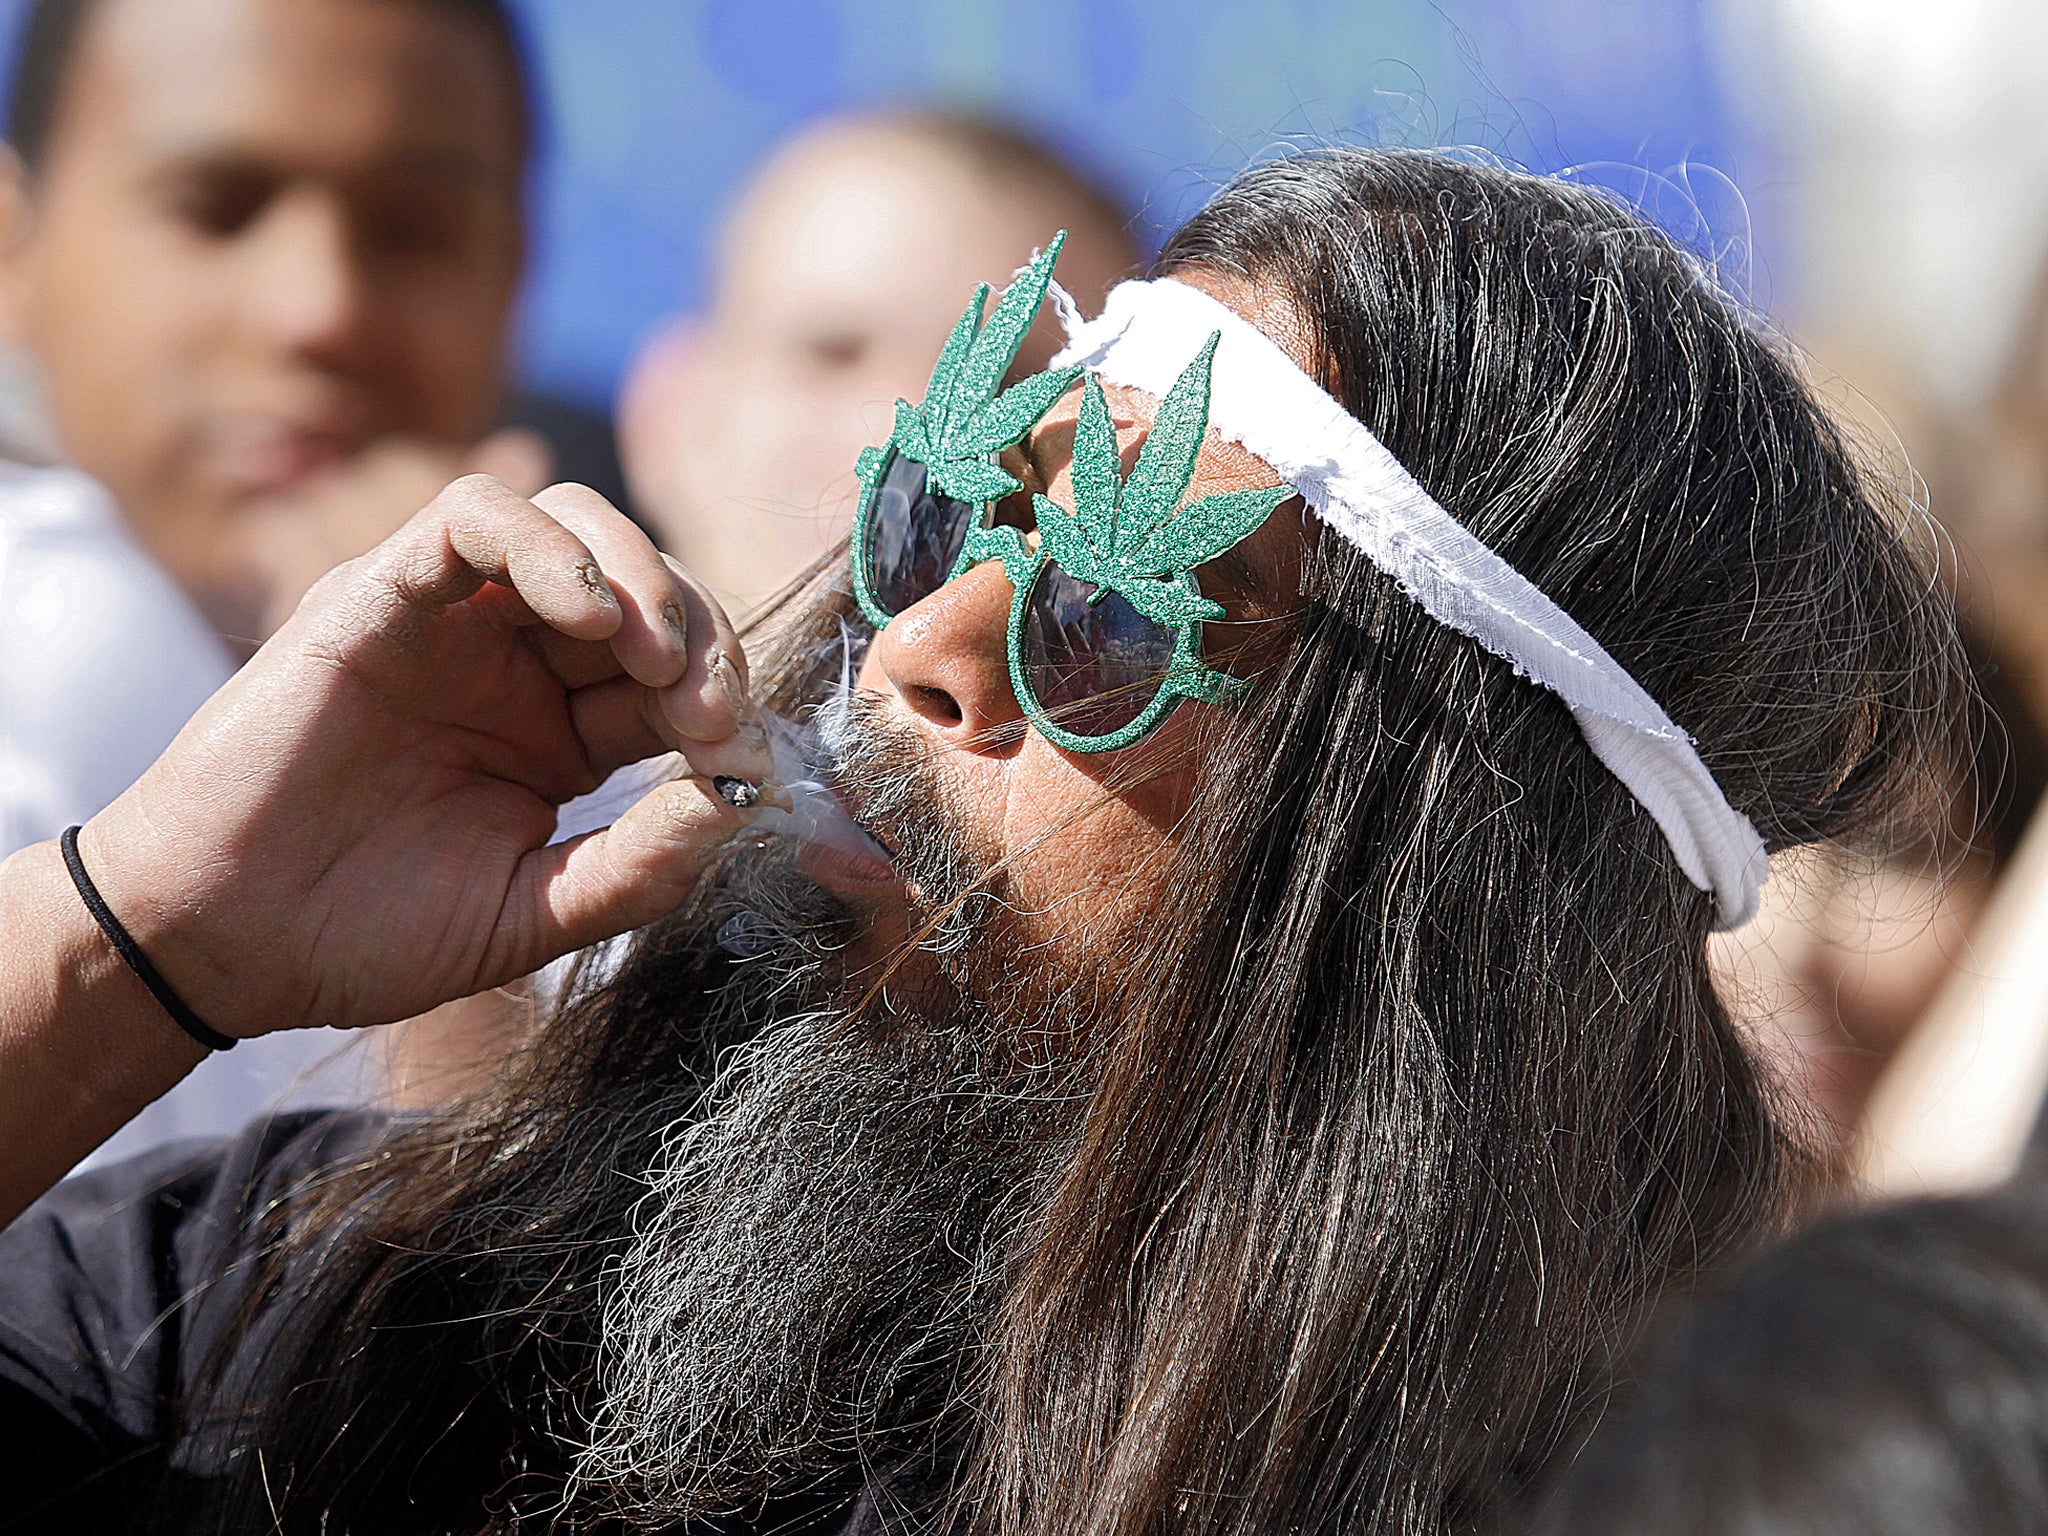 A man takes part in a collective cannabis smoking event in Denver, Colorado. Colorado will become the first state to allow the sale of marijuana for recreational use in shops from 1 January 2014